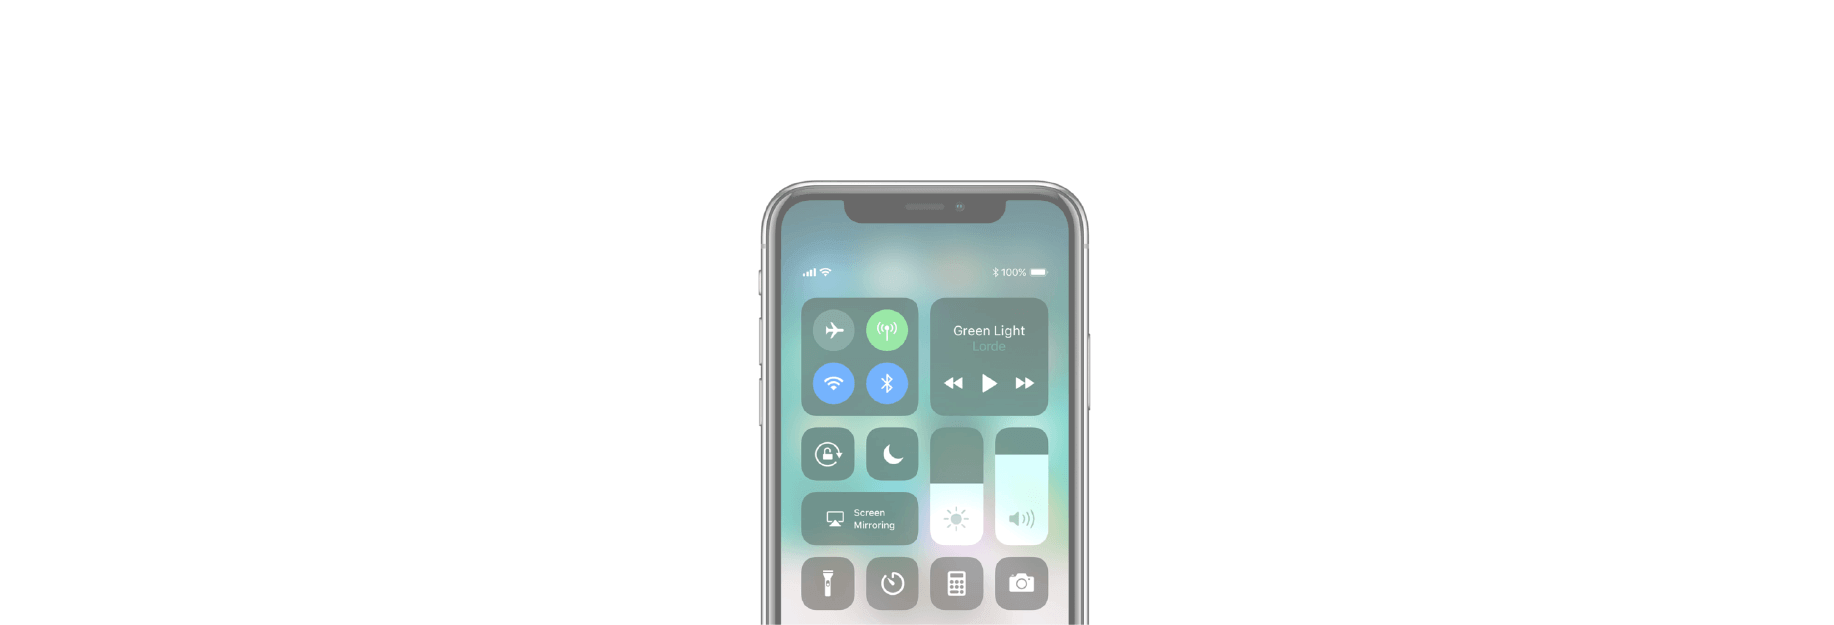 How to Use and Customize Control Center